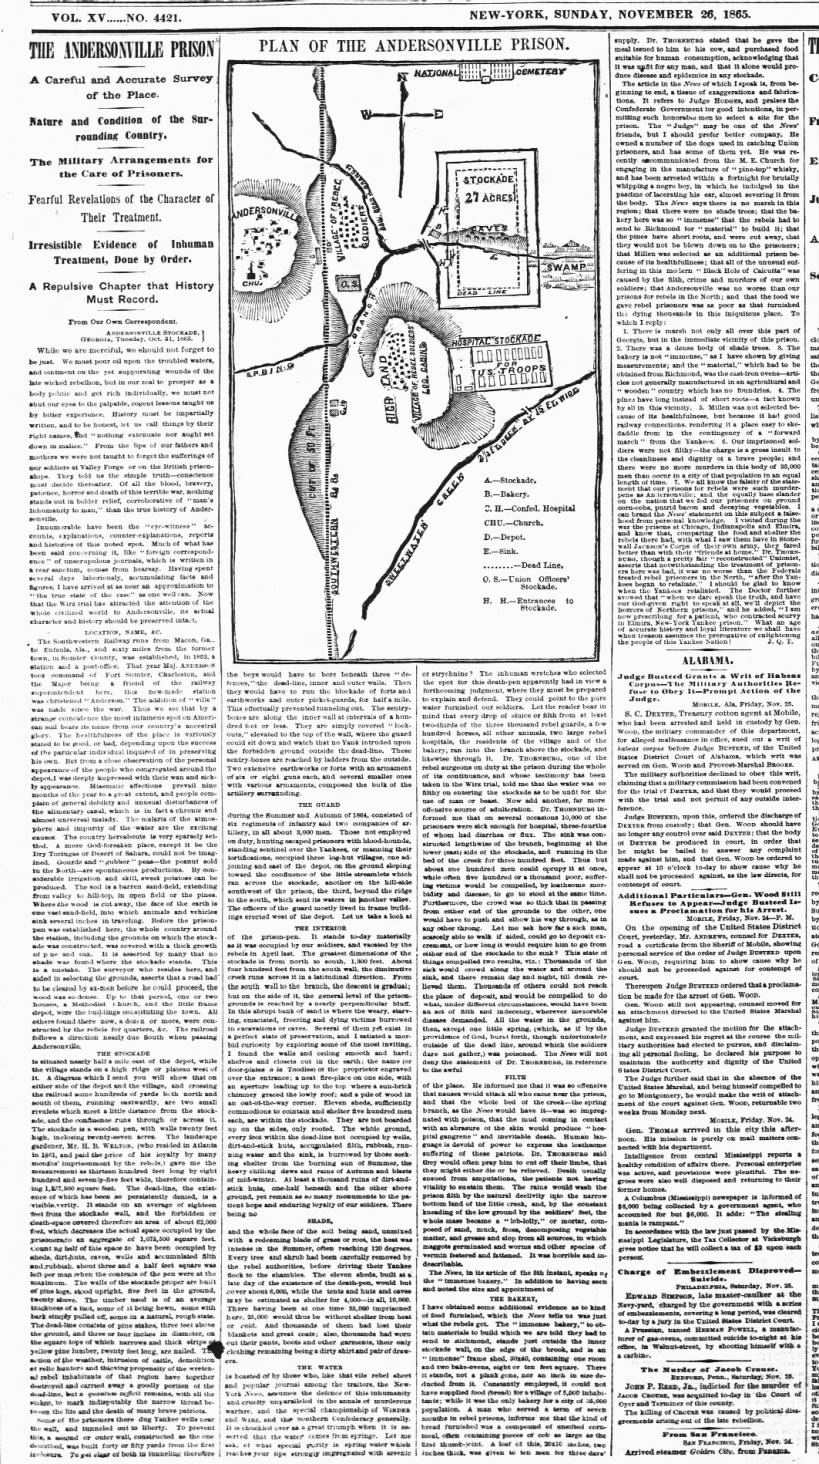 New York Times article on Andersonville Prison (with map)